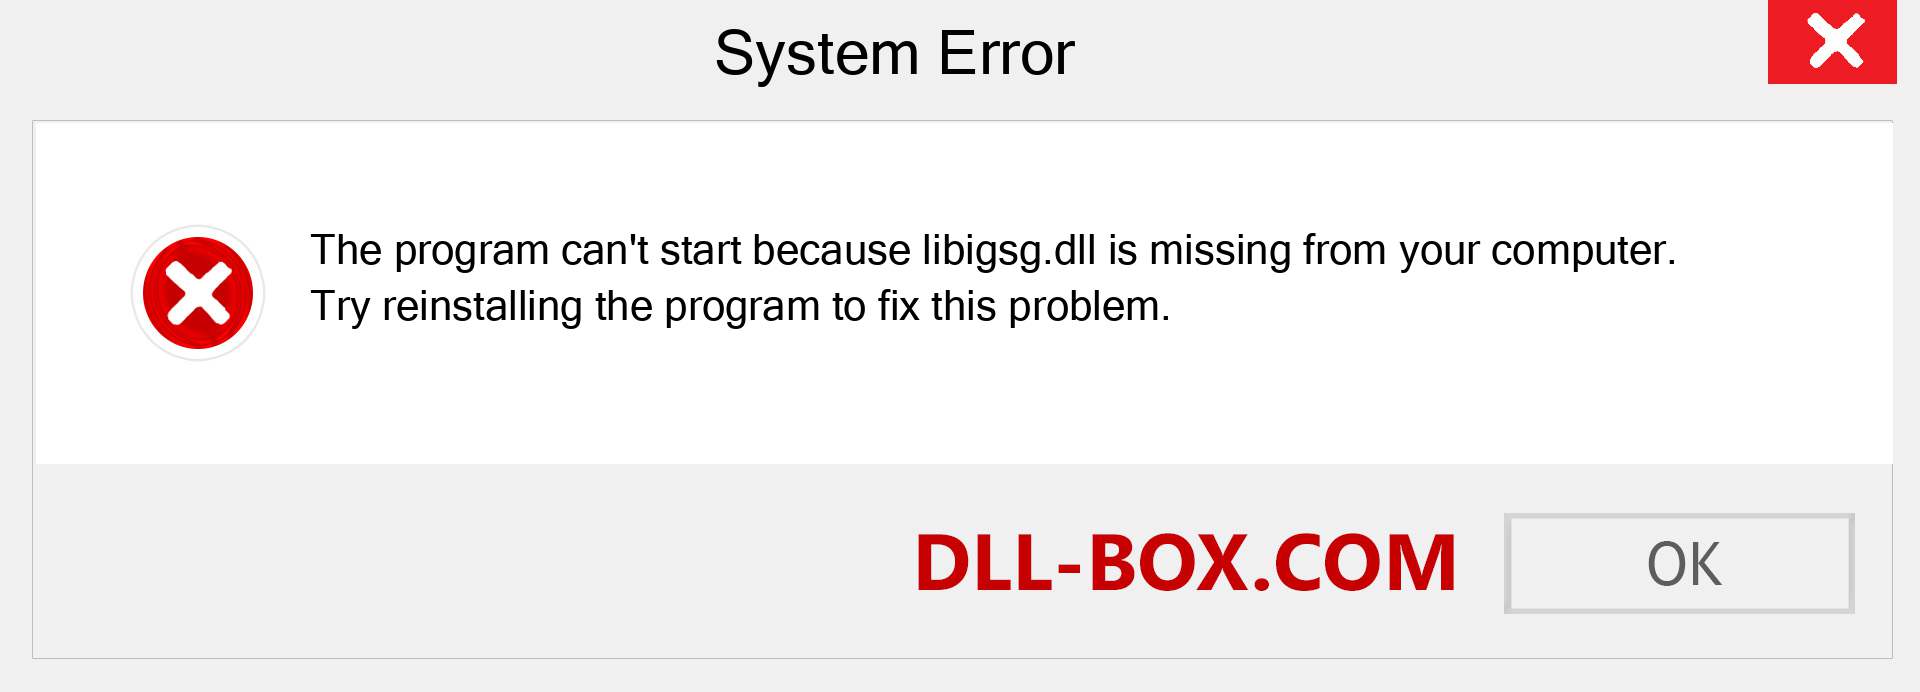  libigsg.dll file is missing?. Download for Windows 7, 8, 10 - Fix  libigsg dll Missing Error on Windows, photos, images